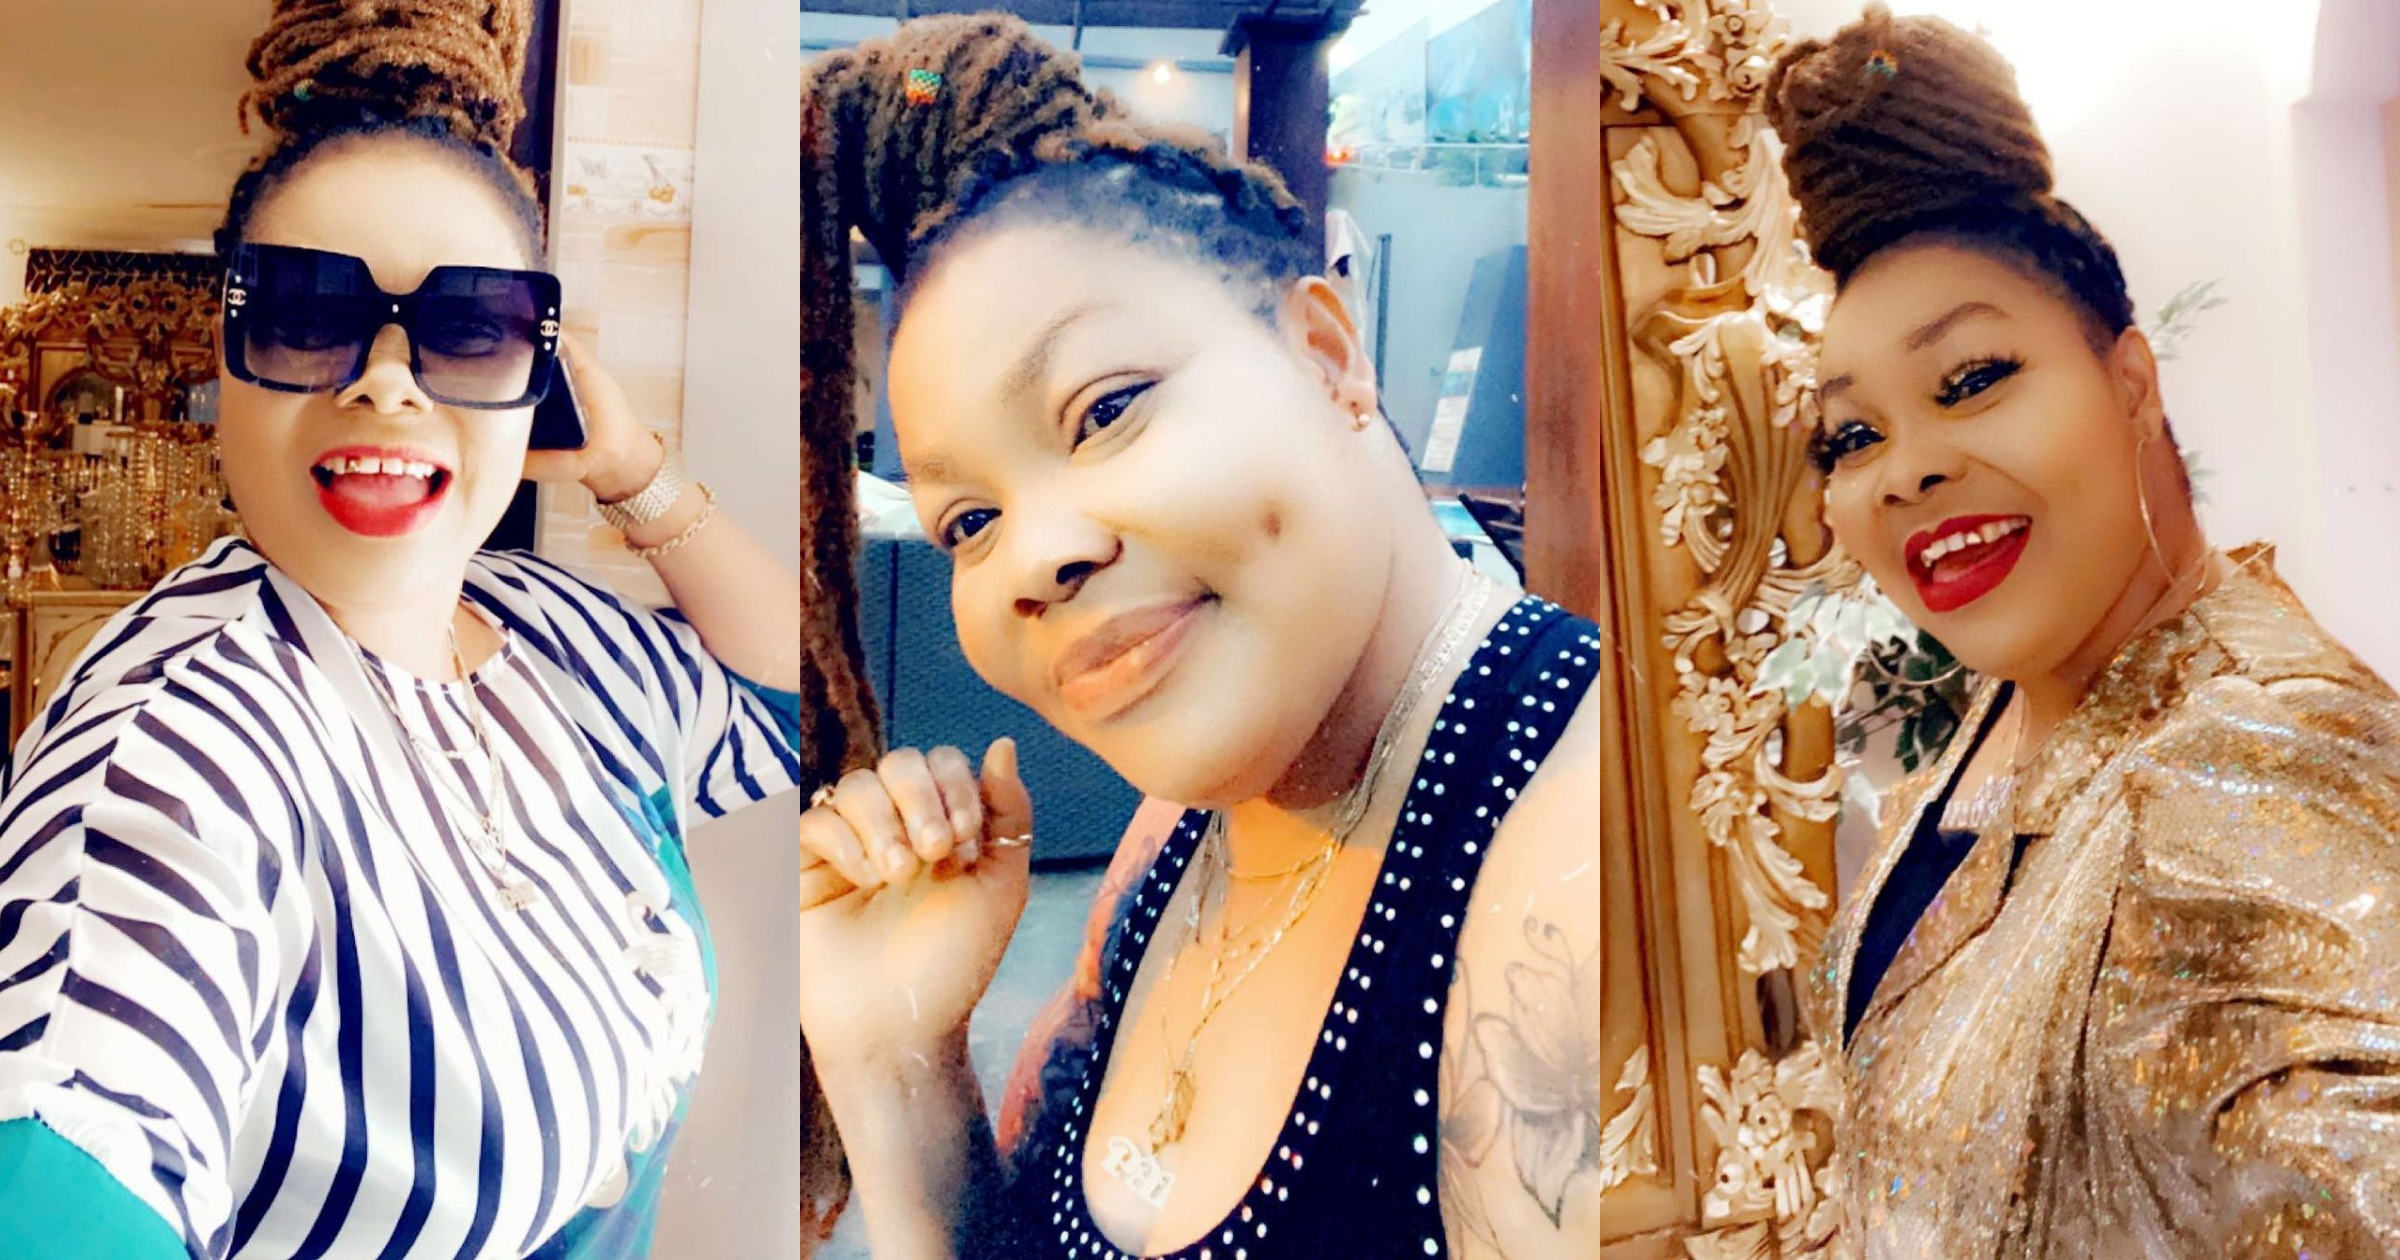 Lady recounts how she dated Agradaa's husband as revenge after priestess 'stole her school fees